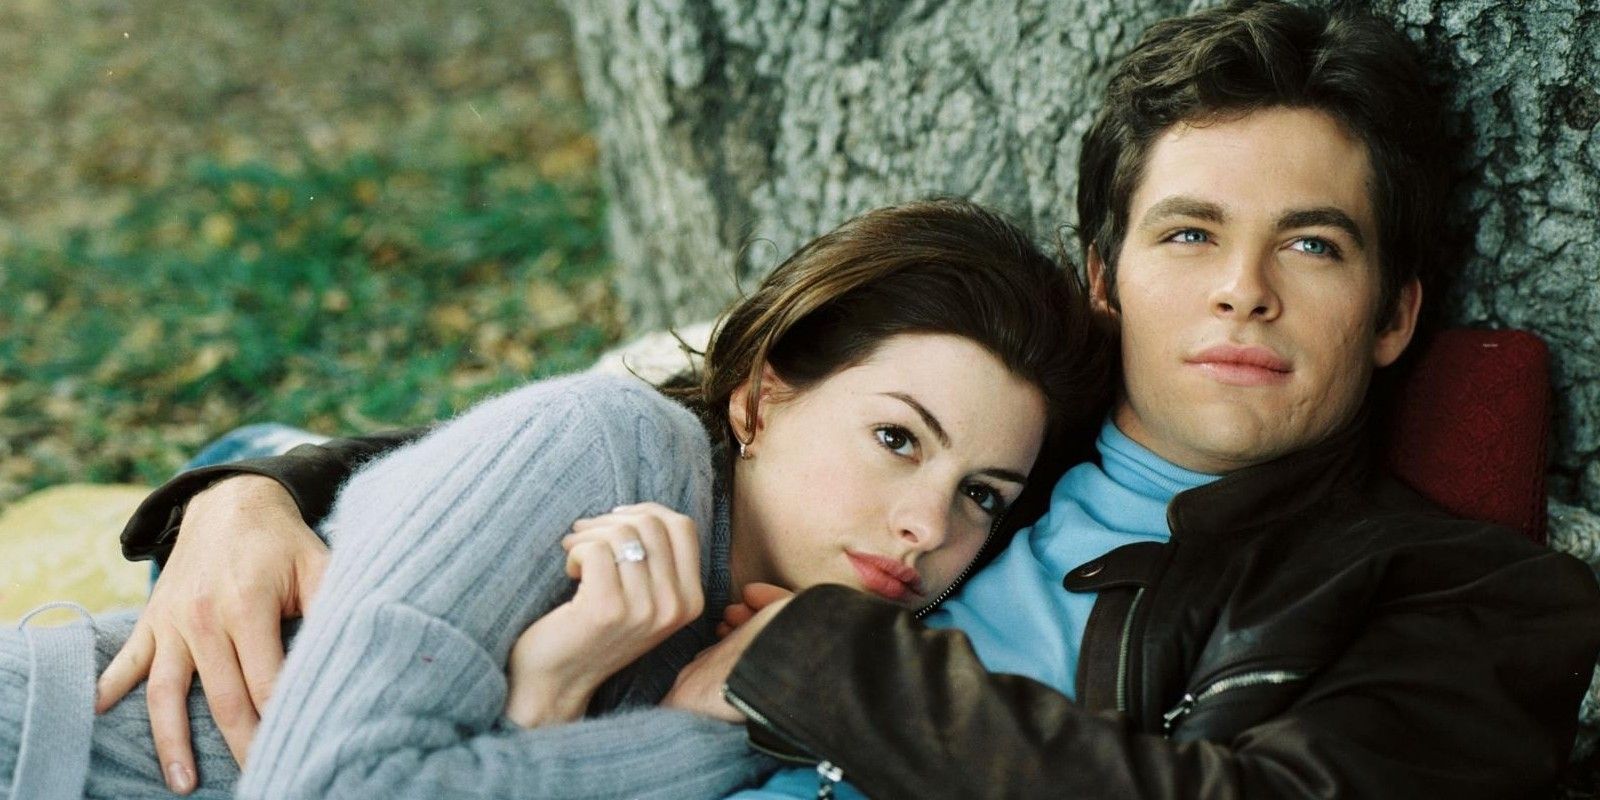 Mia and Nicholas cuddle under a tree in The Princess Diaries 2: Royal Engagement.